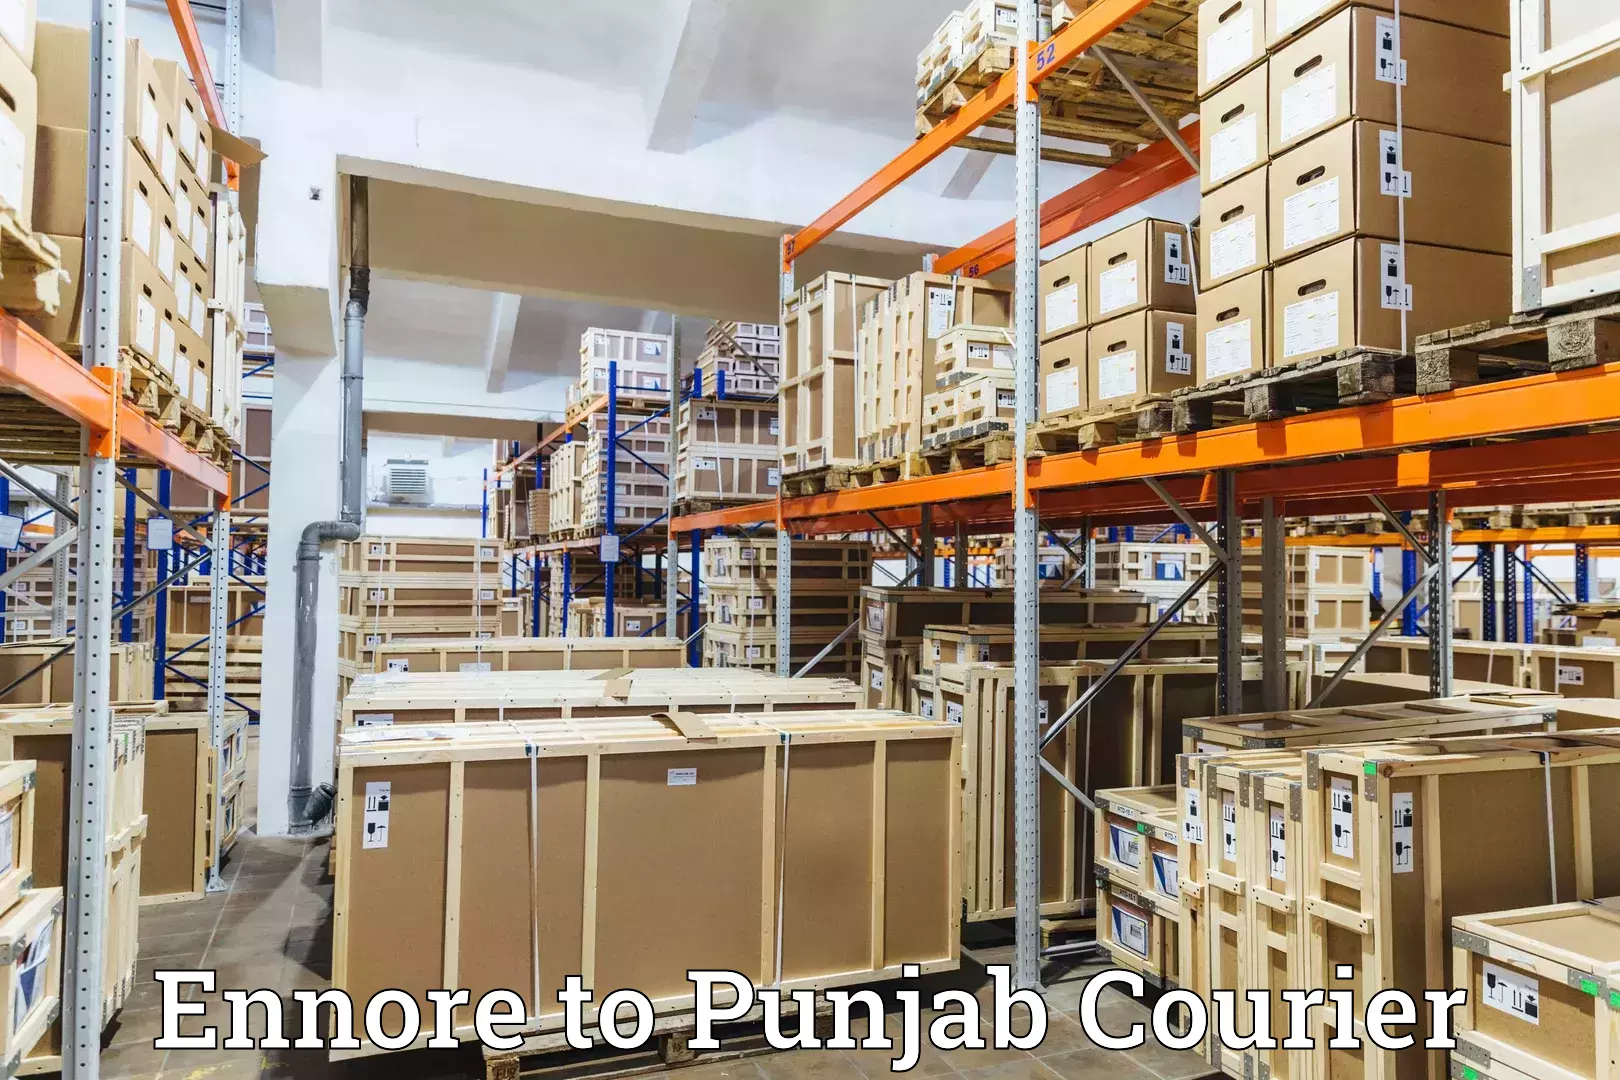 24/7 courier service Ennore to Amritsar